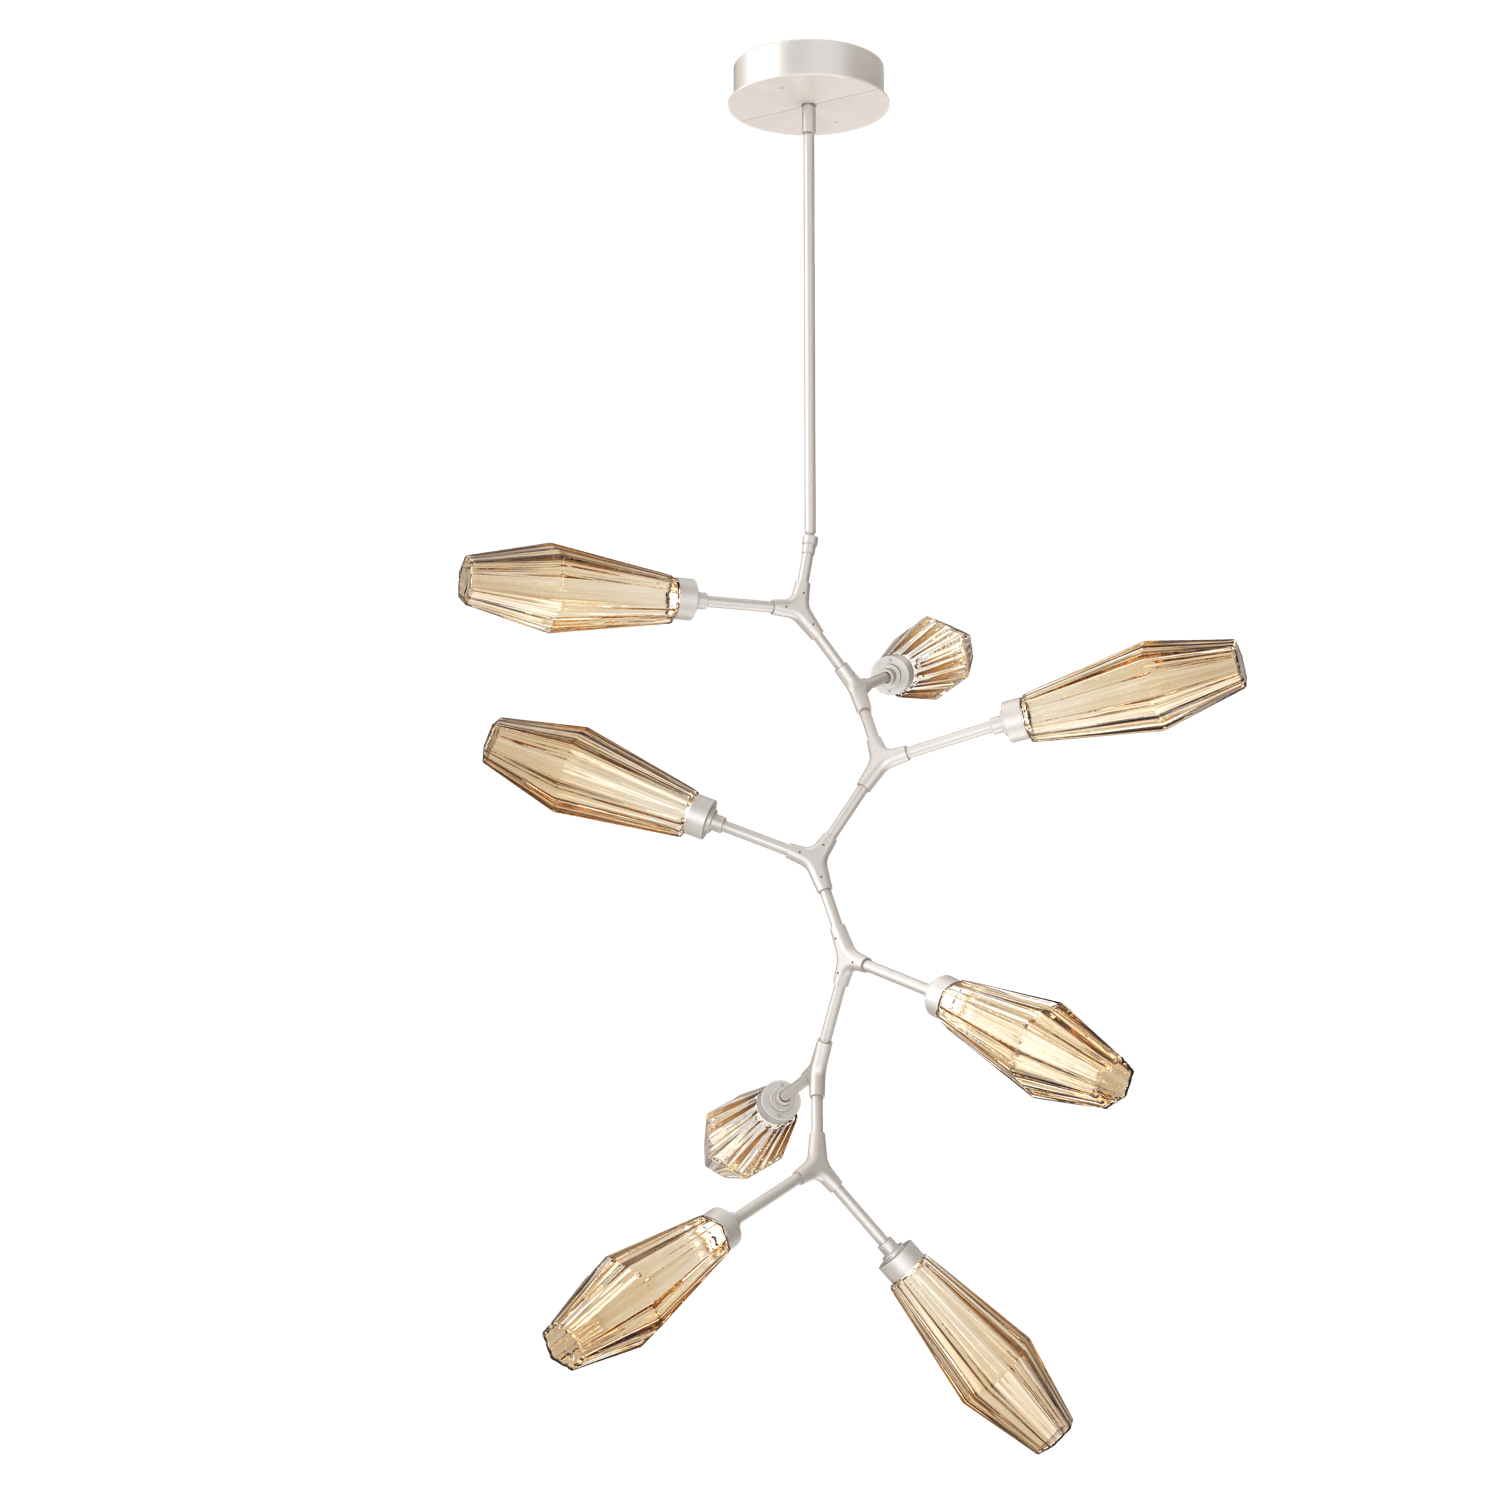 CHB0049-VB-BS-RB-Hammerton-Studio-Aalto-8-light-modern-vine-chandelier-with-metallic-beige-silver-finish-and-optic-ribbed-bronze-glass-shades-and-LED-lamping